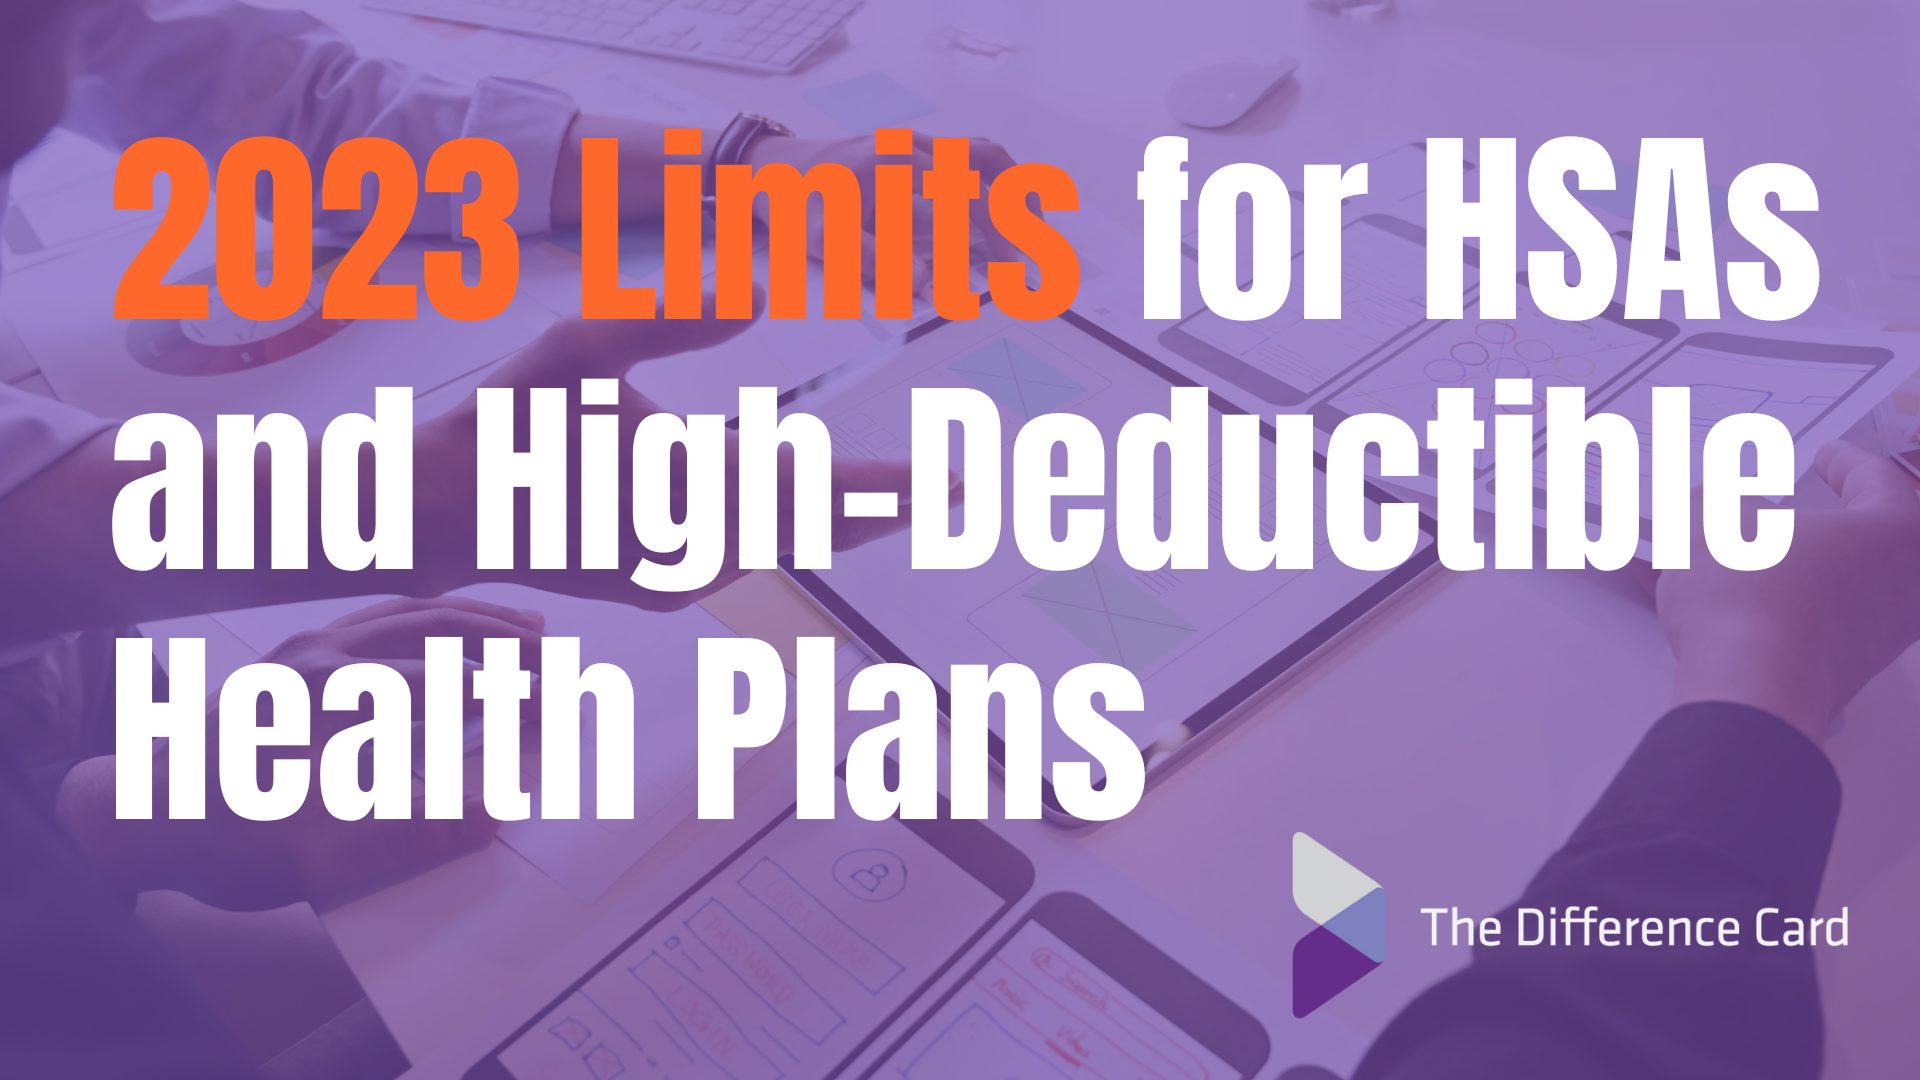 https://www.differencecard.com/wp-content/uploads/2022/05/2023-Limits-for-HSAs-and-High-Deductible-Health-Plans.jpg